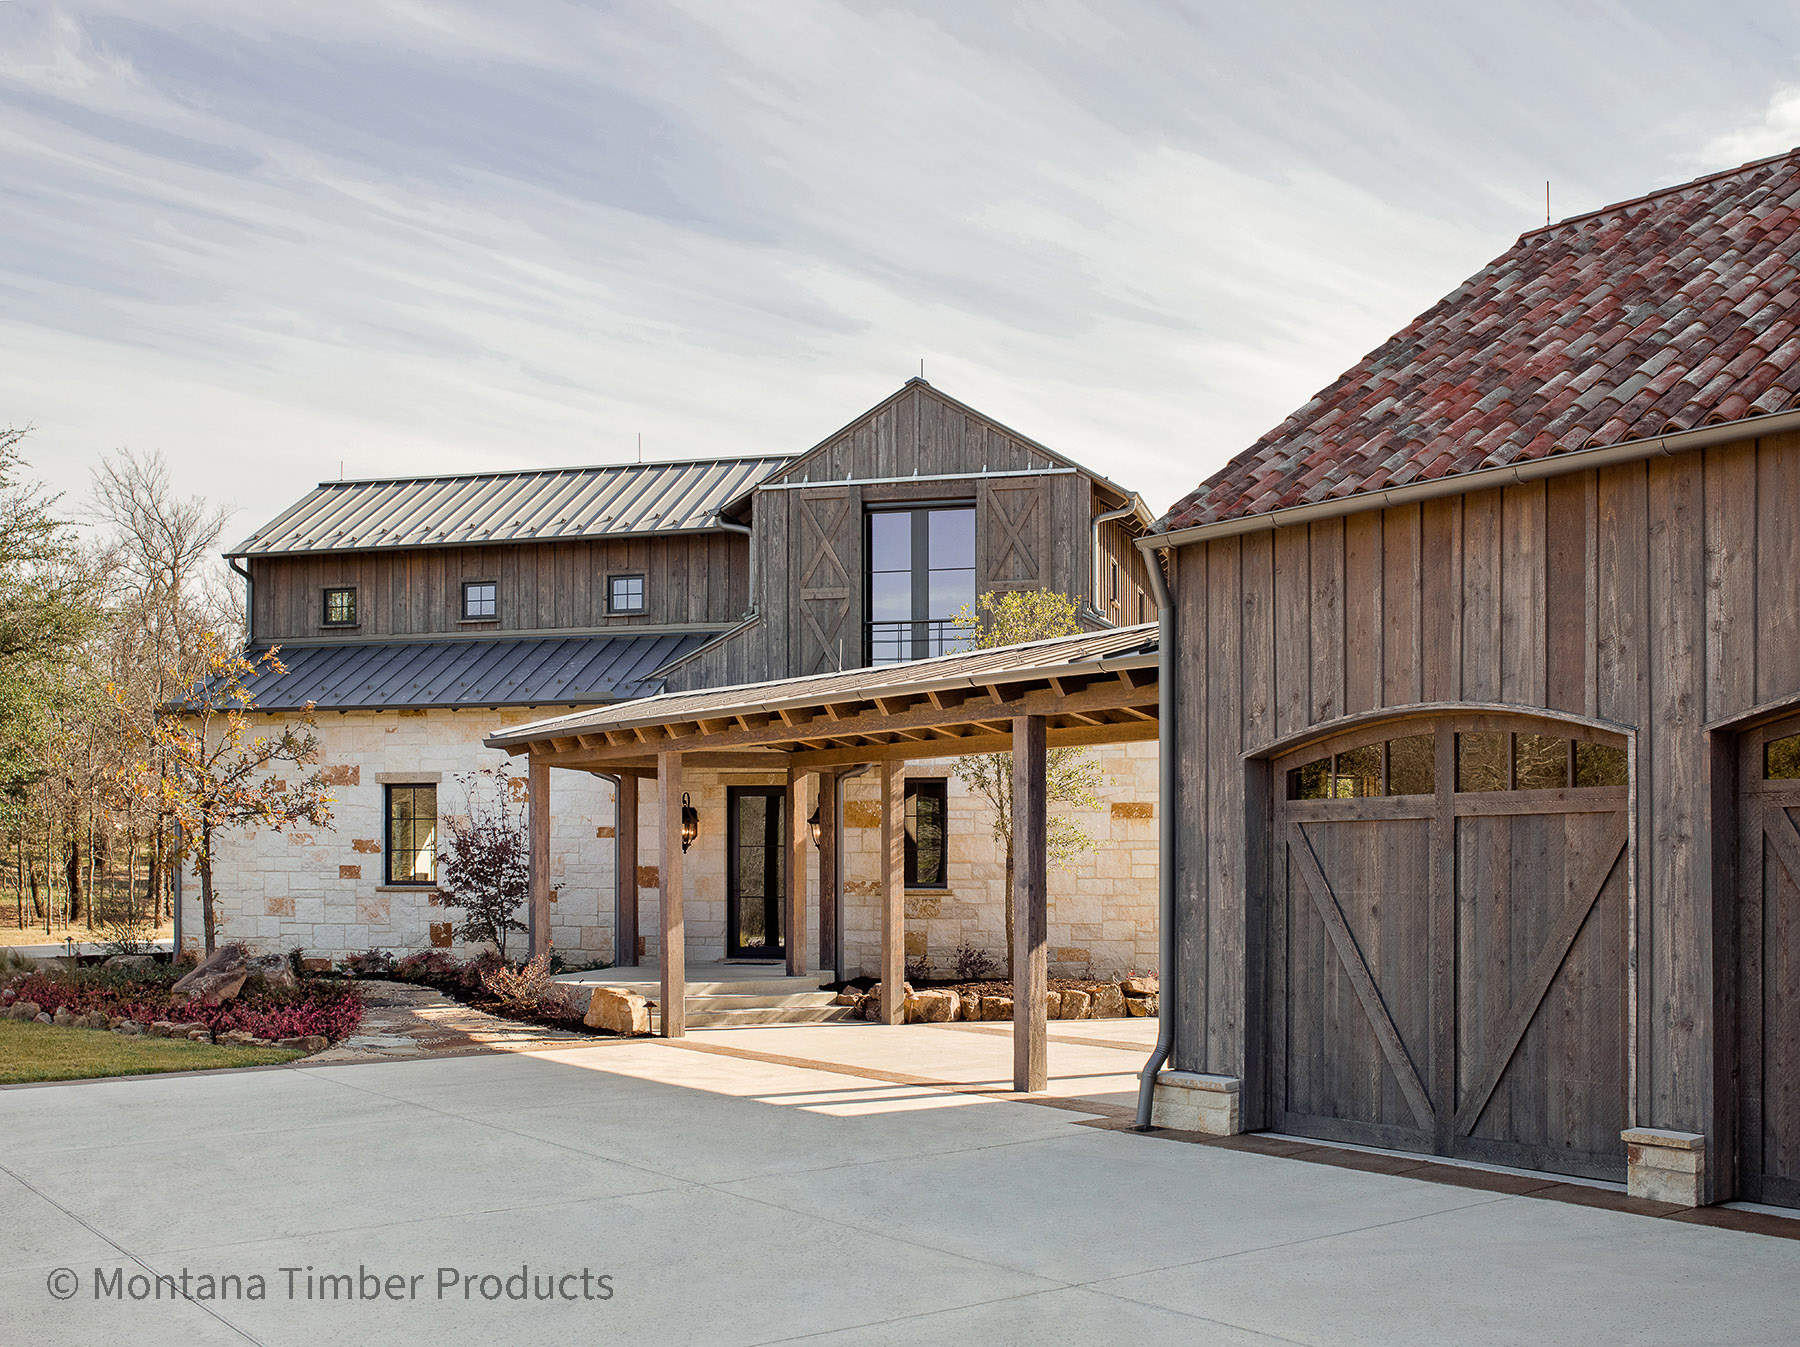 Rustic Elegance in Texas with ranchwood™